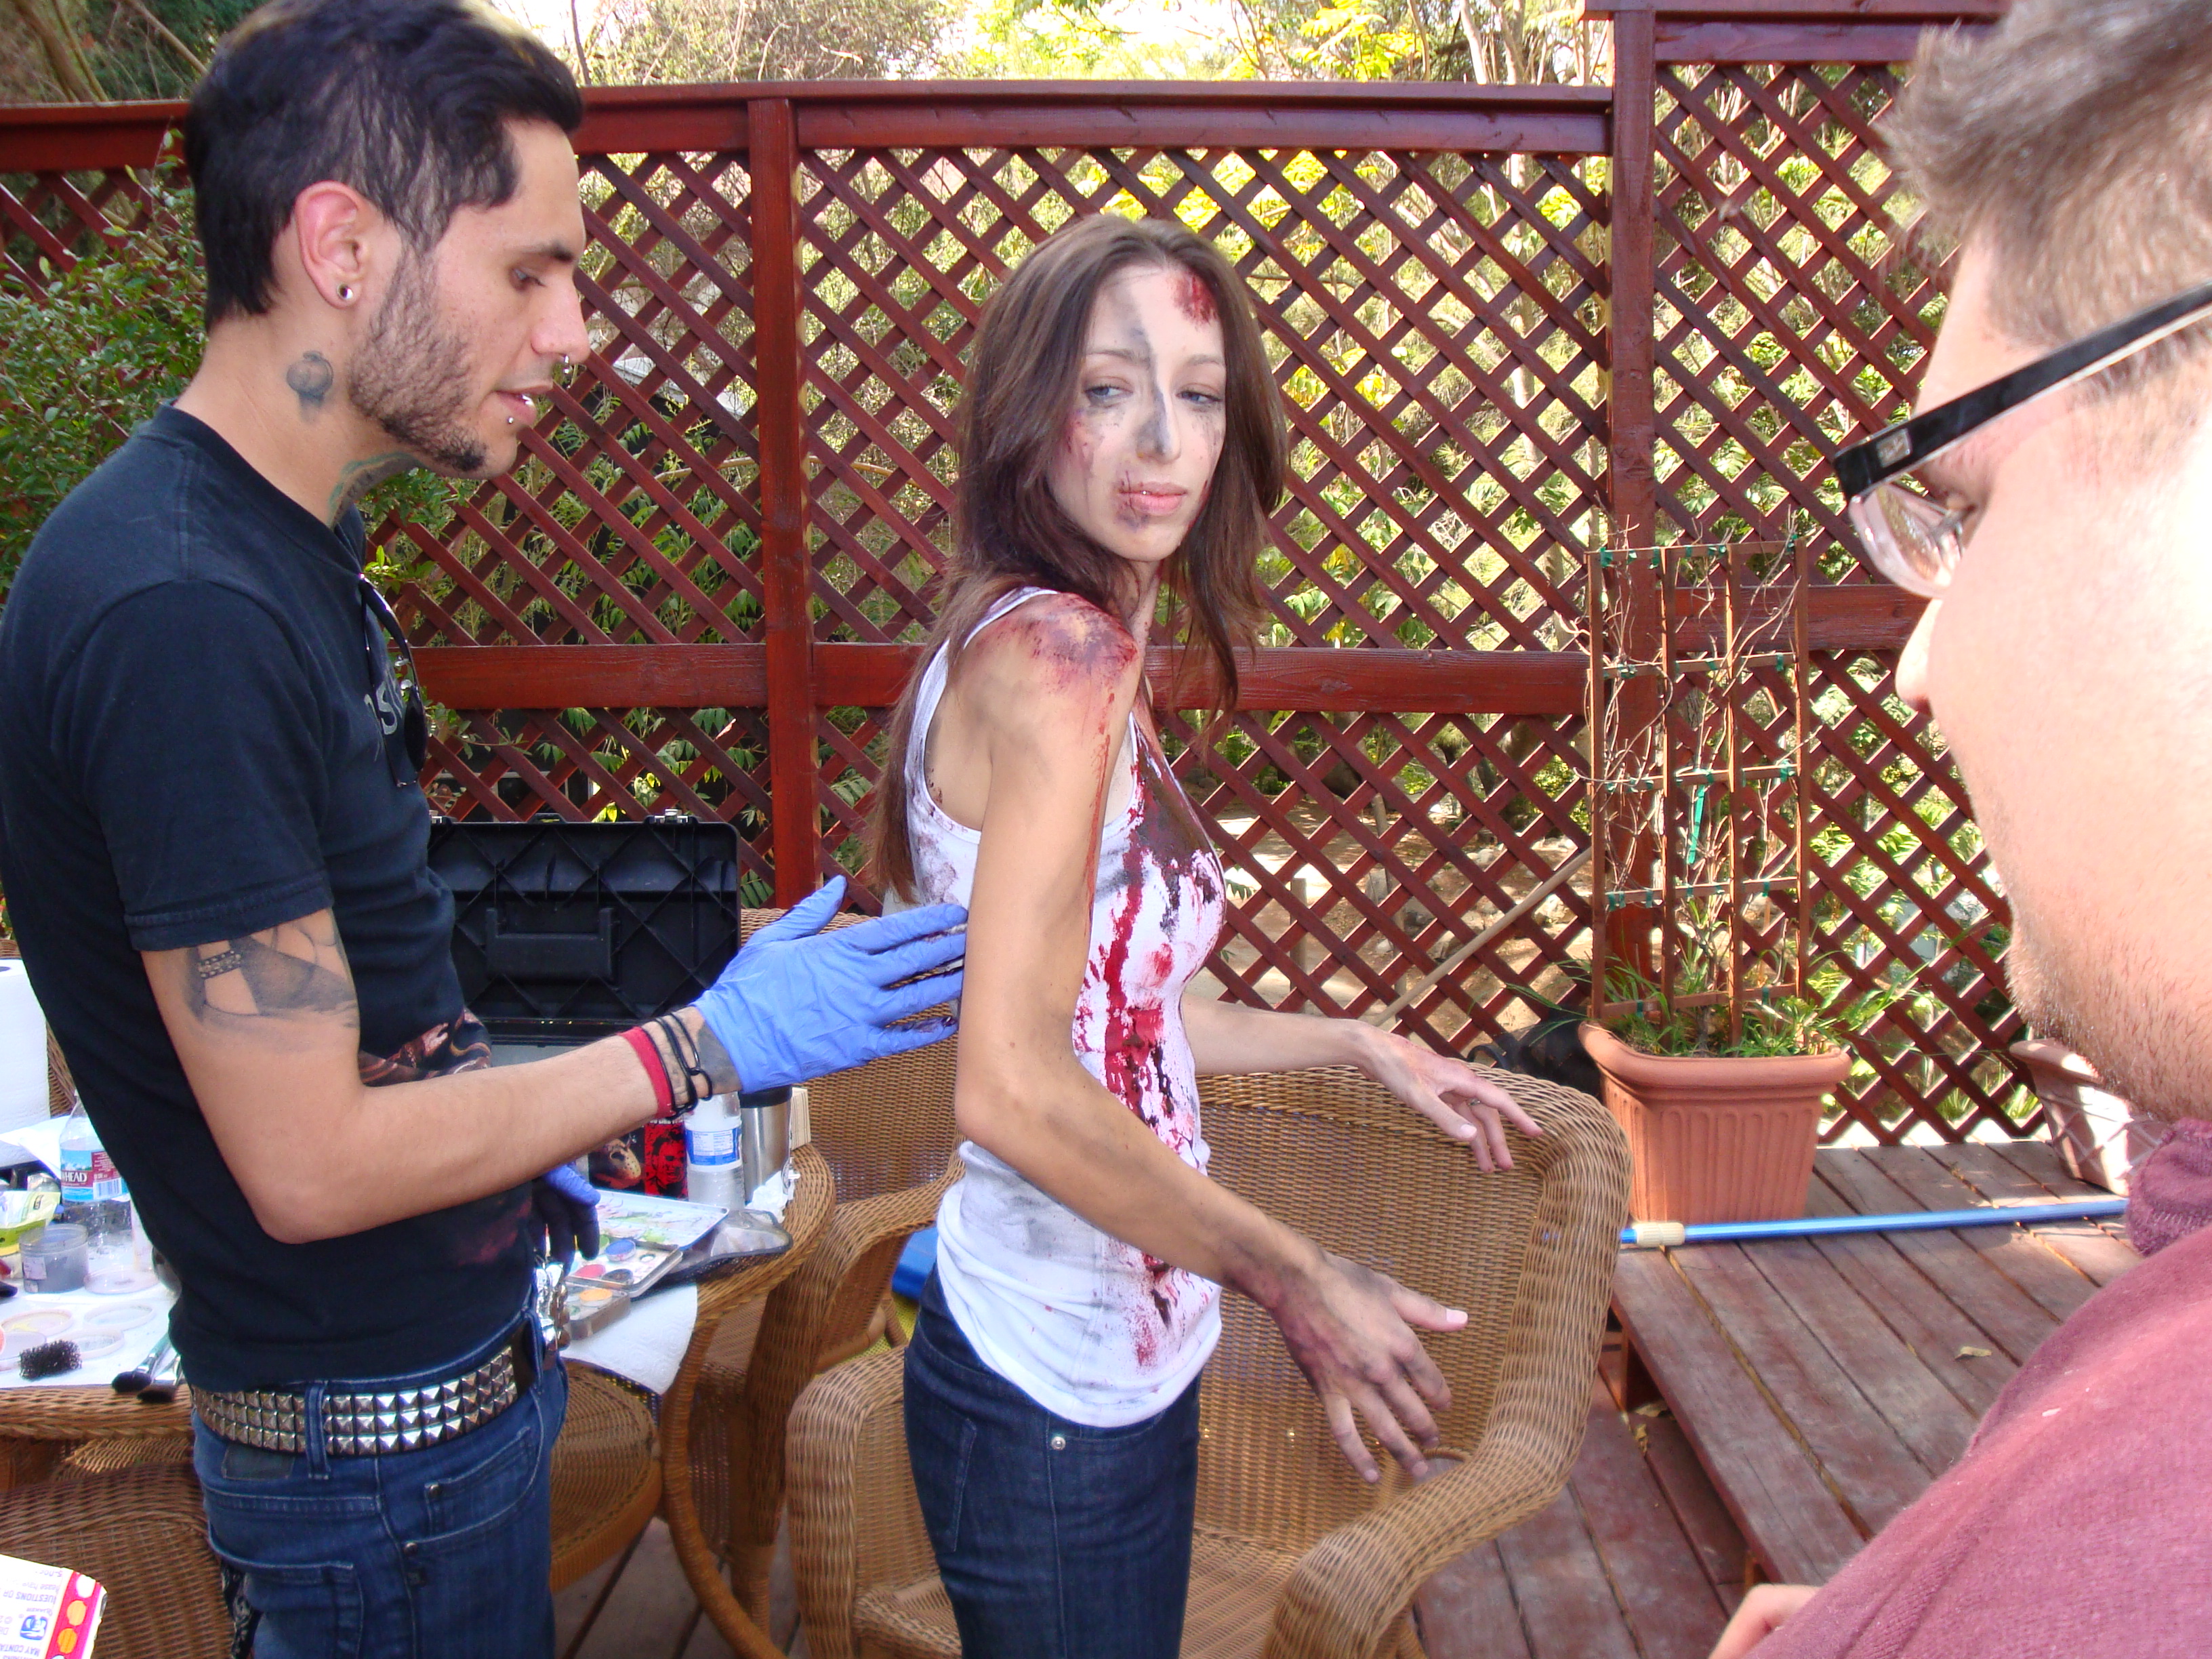 SFX Artist Gage Munster applies the last touch of make up as Director Ricardo Gonzales looks on.